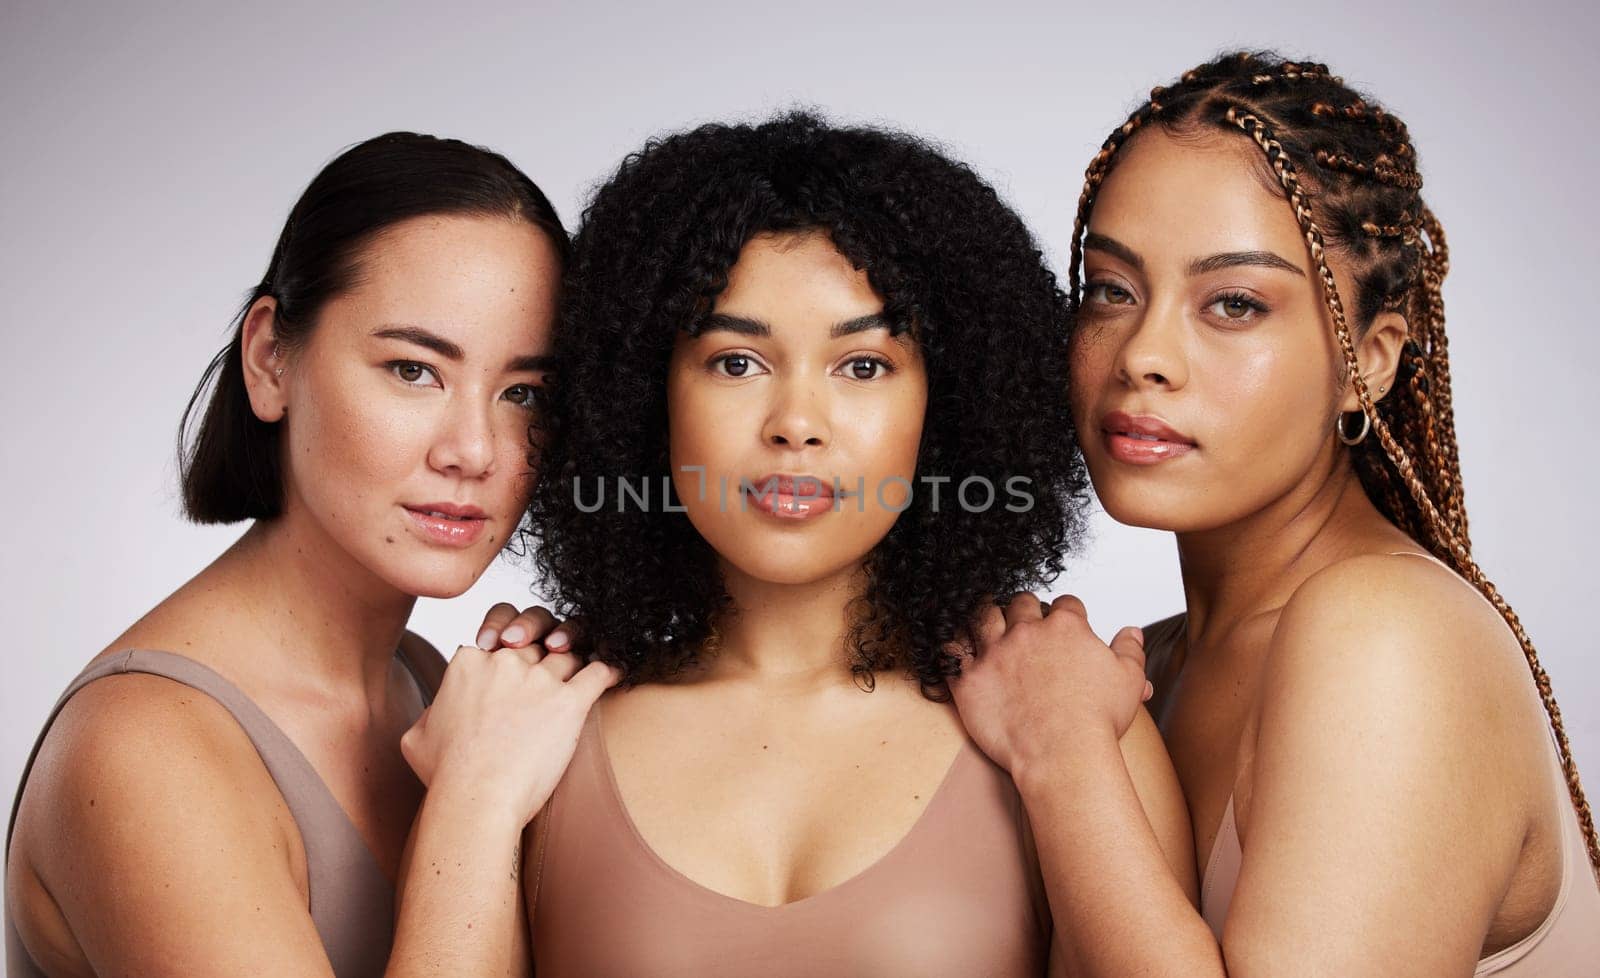 Portrait, makeup and diversity with woman friends in studio on a gray background together for skincare. Face, beauty and natural with a female model group posing to promote support or inclusion.